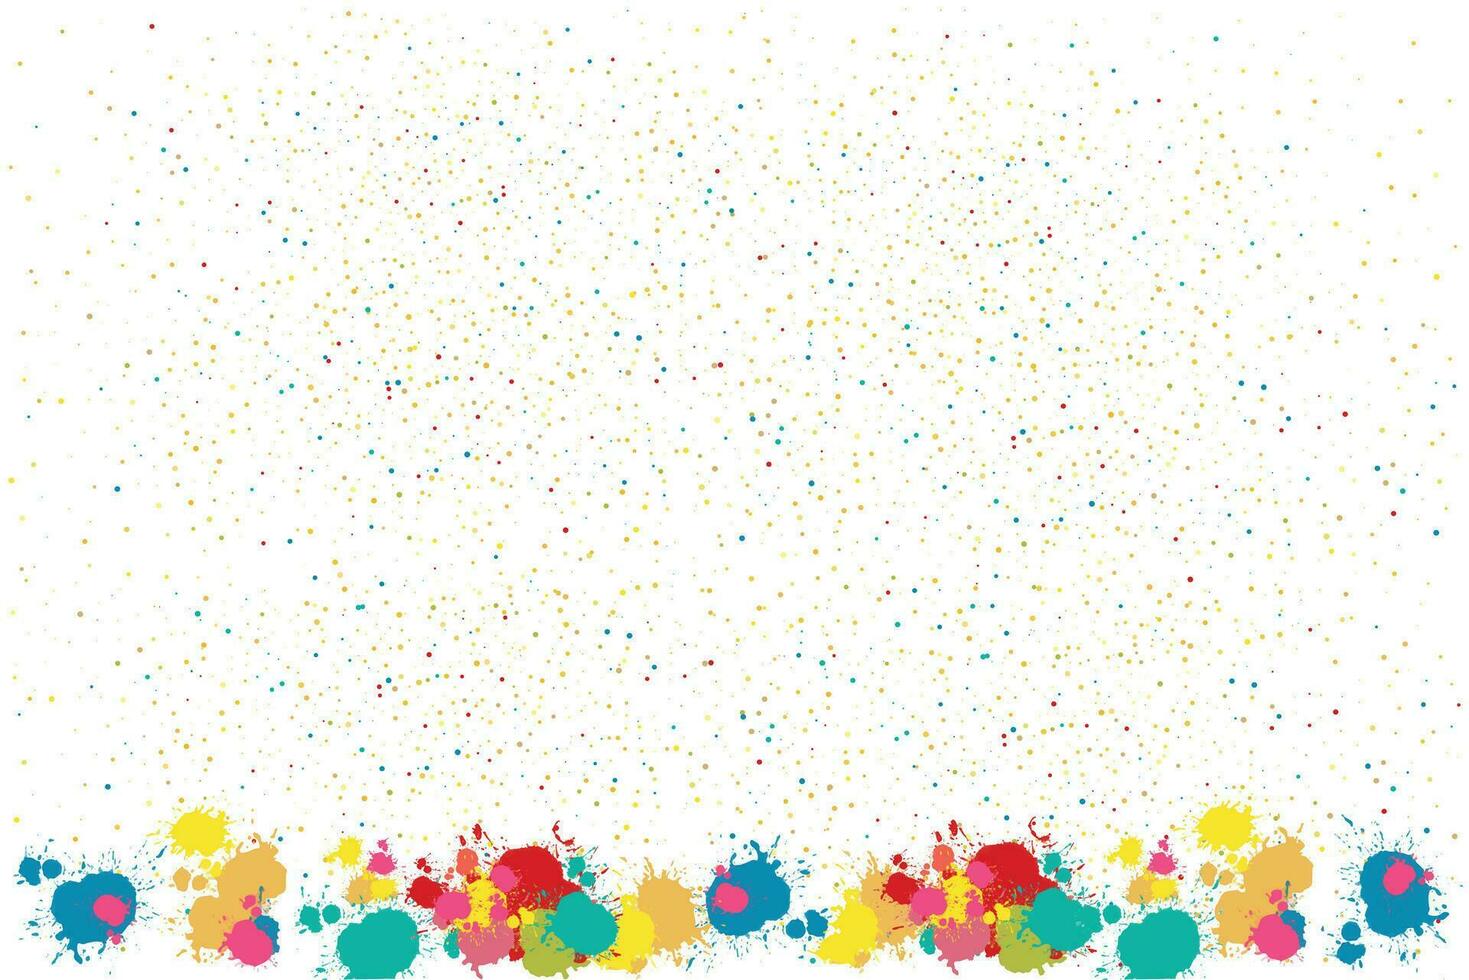 Background with watercolor splashes. Paint stain. Grunge texture colors. Splashes of rainbow paint for your design. Vector